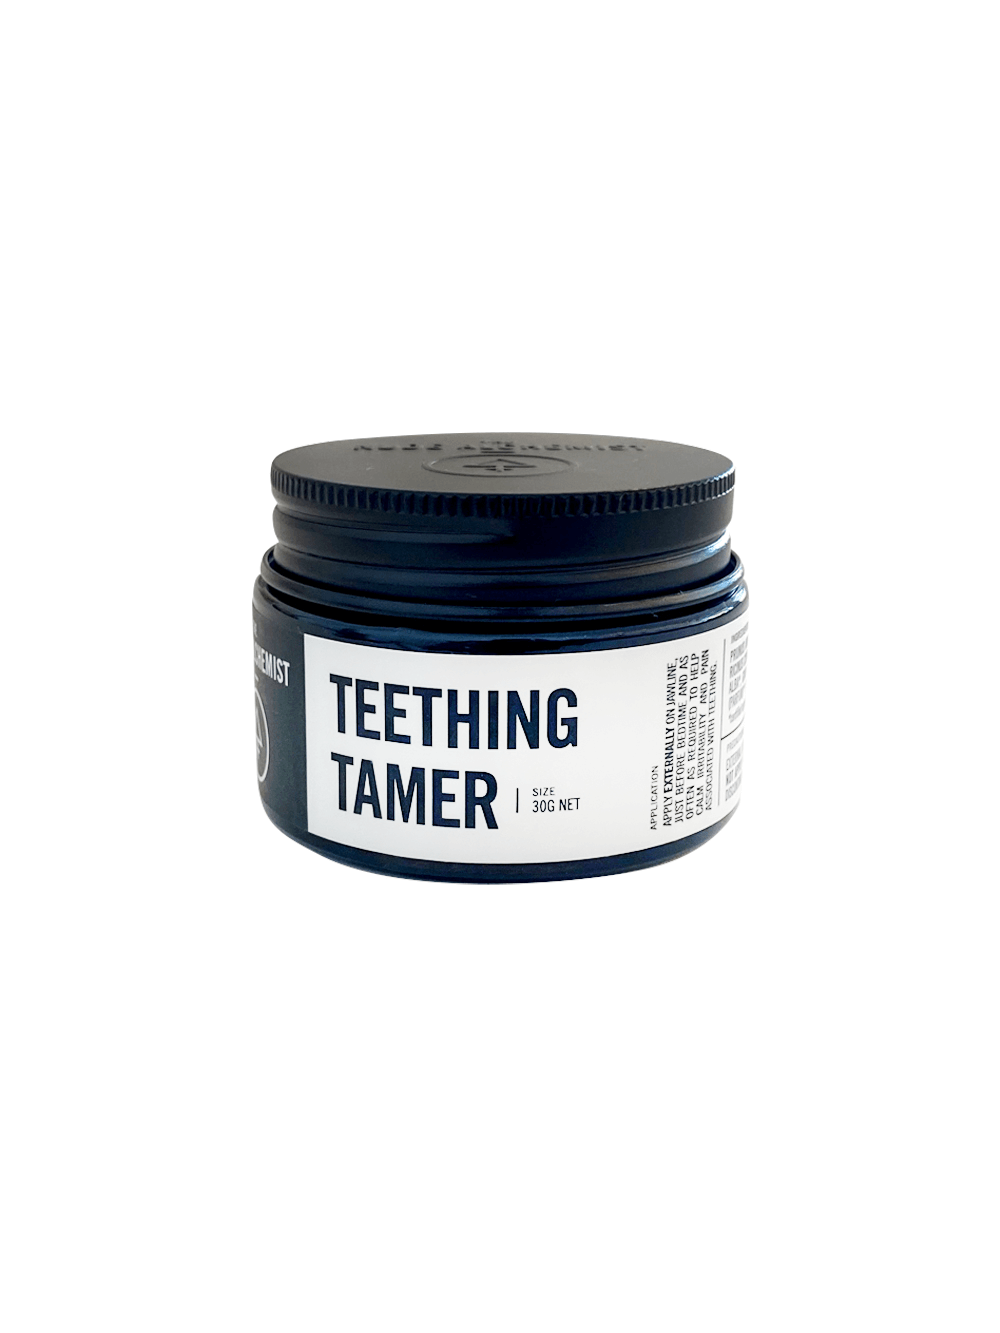 Teething Tamer for teething babies by The Nude Alchamist